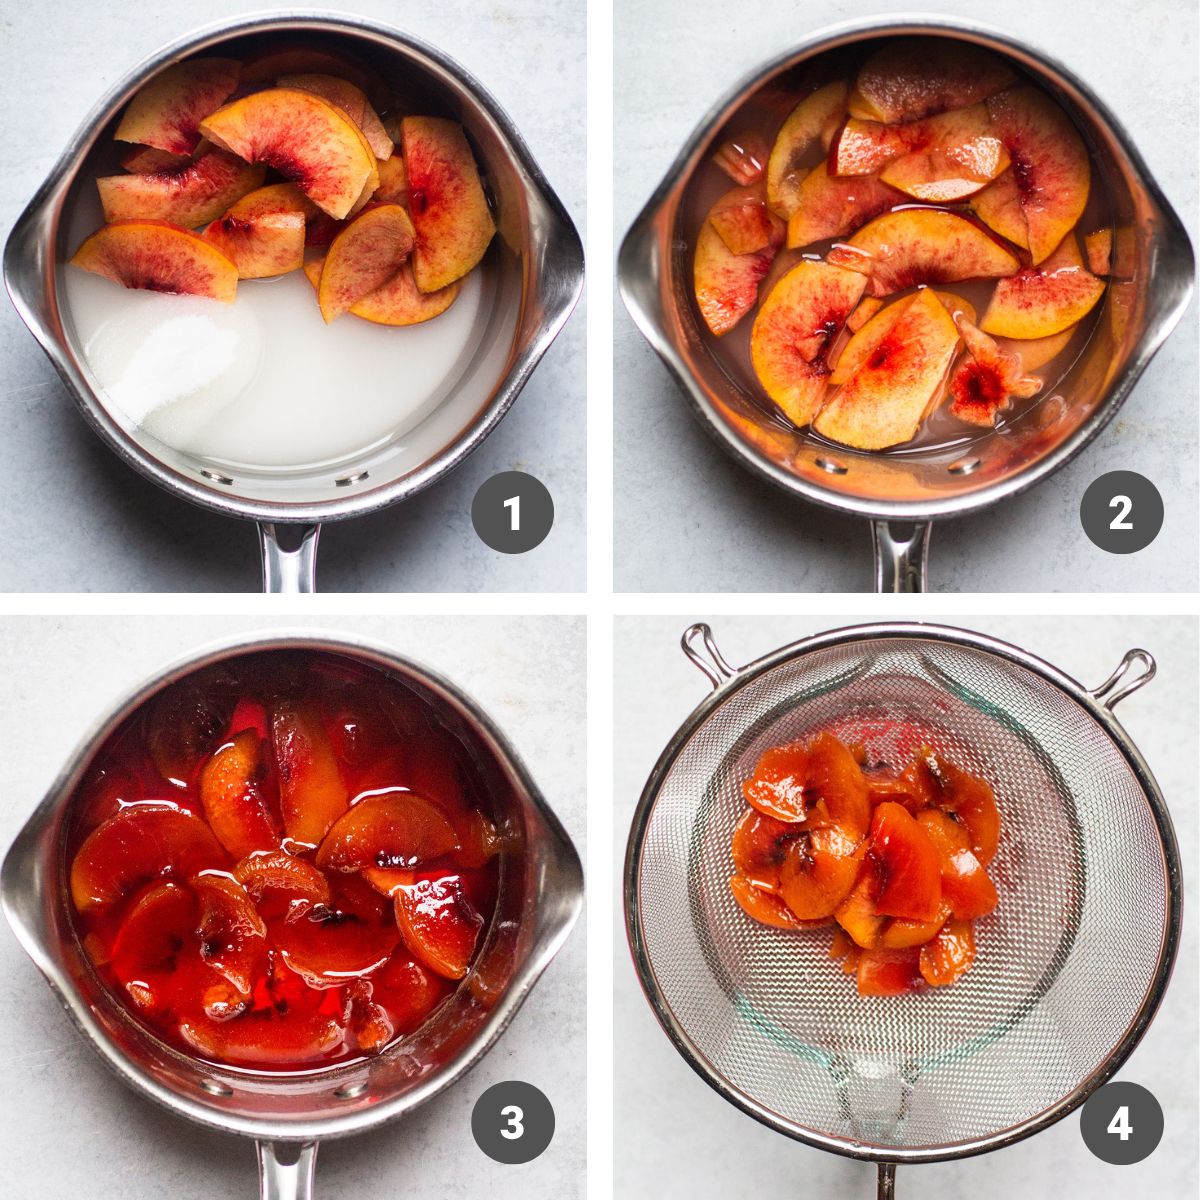 Peach slices, sugar, and water stirred together in a small saucepan.